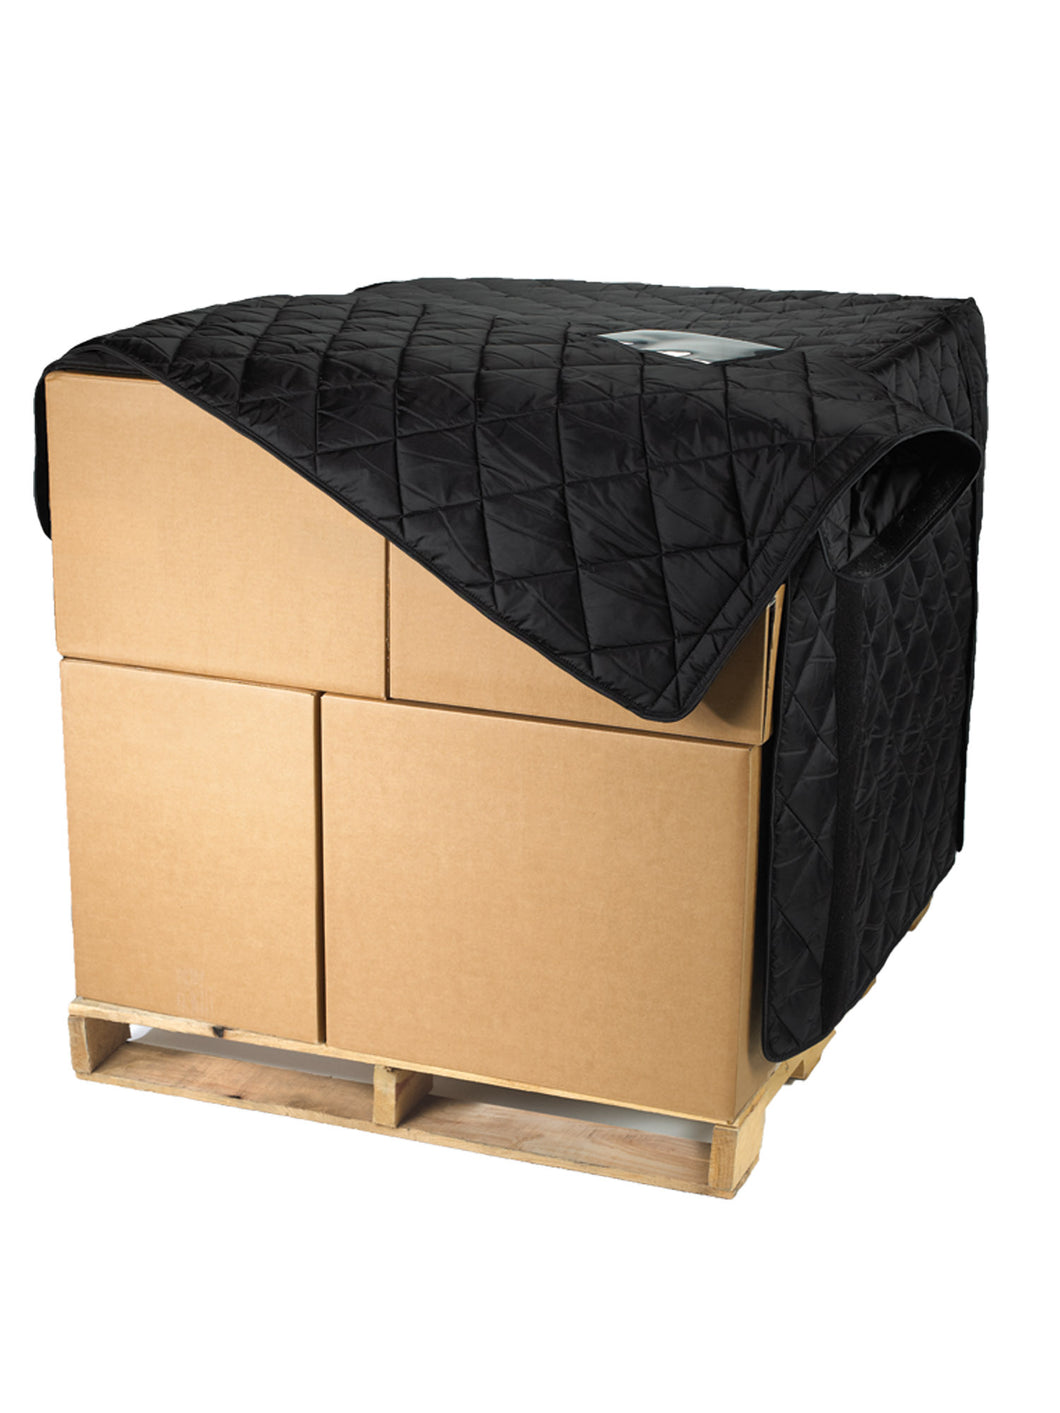 Insulated Standard Pallet Cover